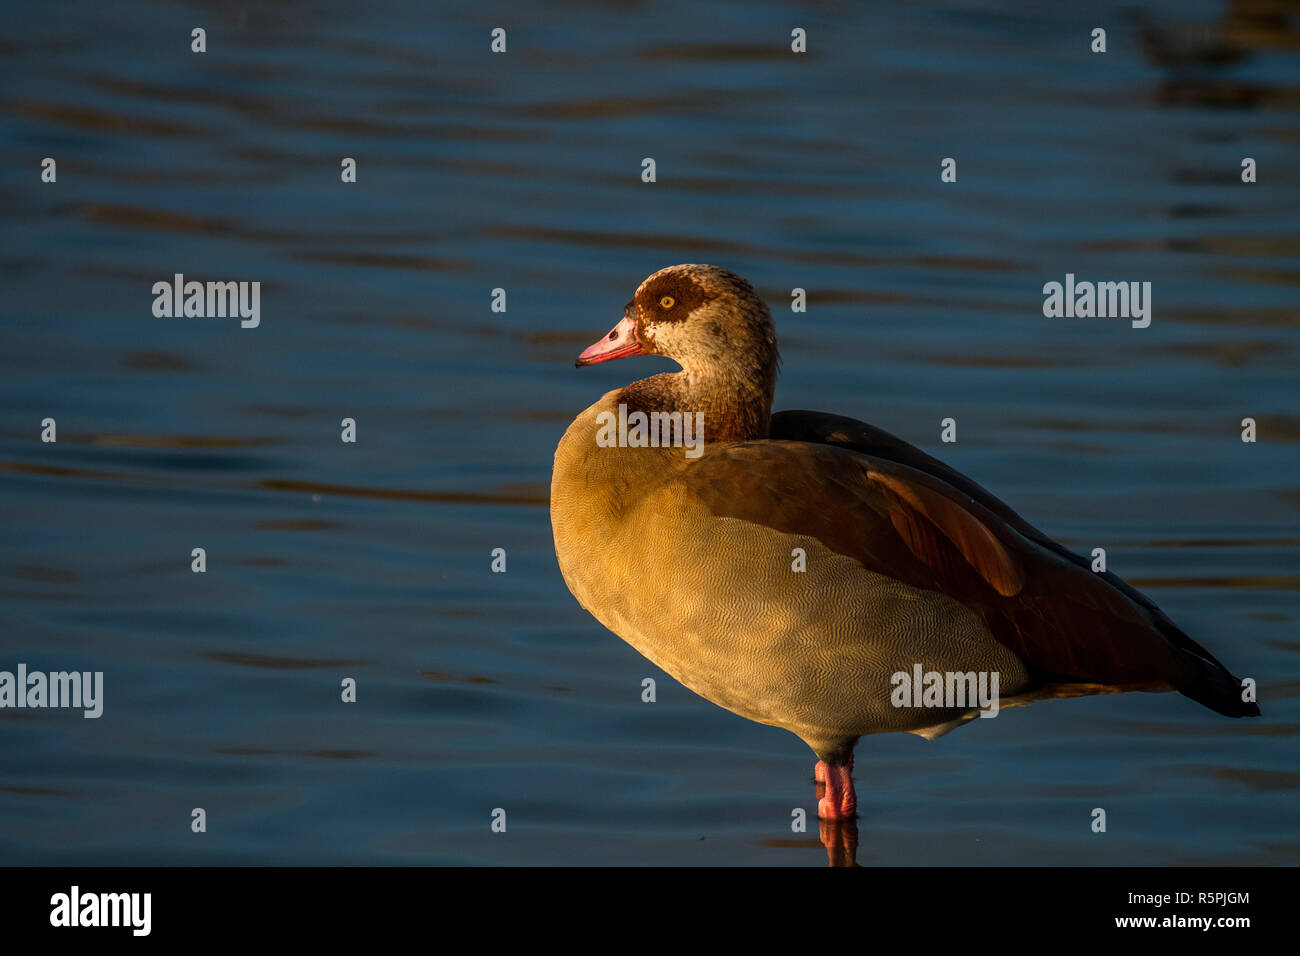 Madrid, Spain. 1st Dec, 2018. Egyptian goose (Alopochen aegyptiaca) during an autumn day in the Valdebernardo Forest Park. Egyptian geese are native to Africa. Due to its colonizing potential and that it constitute a serious threat to native species, habitats or ecosystems, this species has been included in the Spanish Catalog of Invasive Exotic Species. Credit: Marcos del Mazo/Alamy Live News Stock Photo